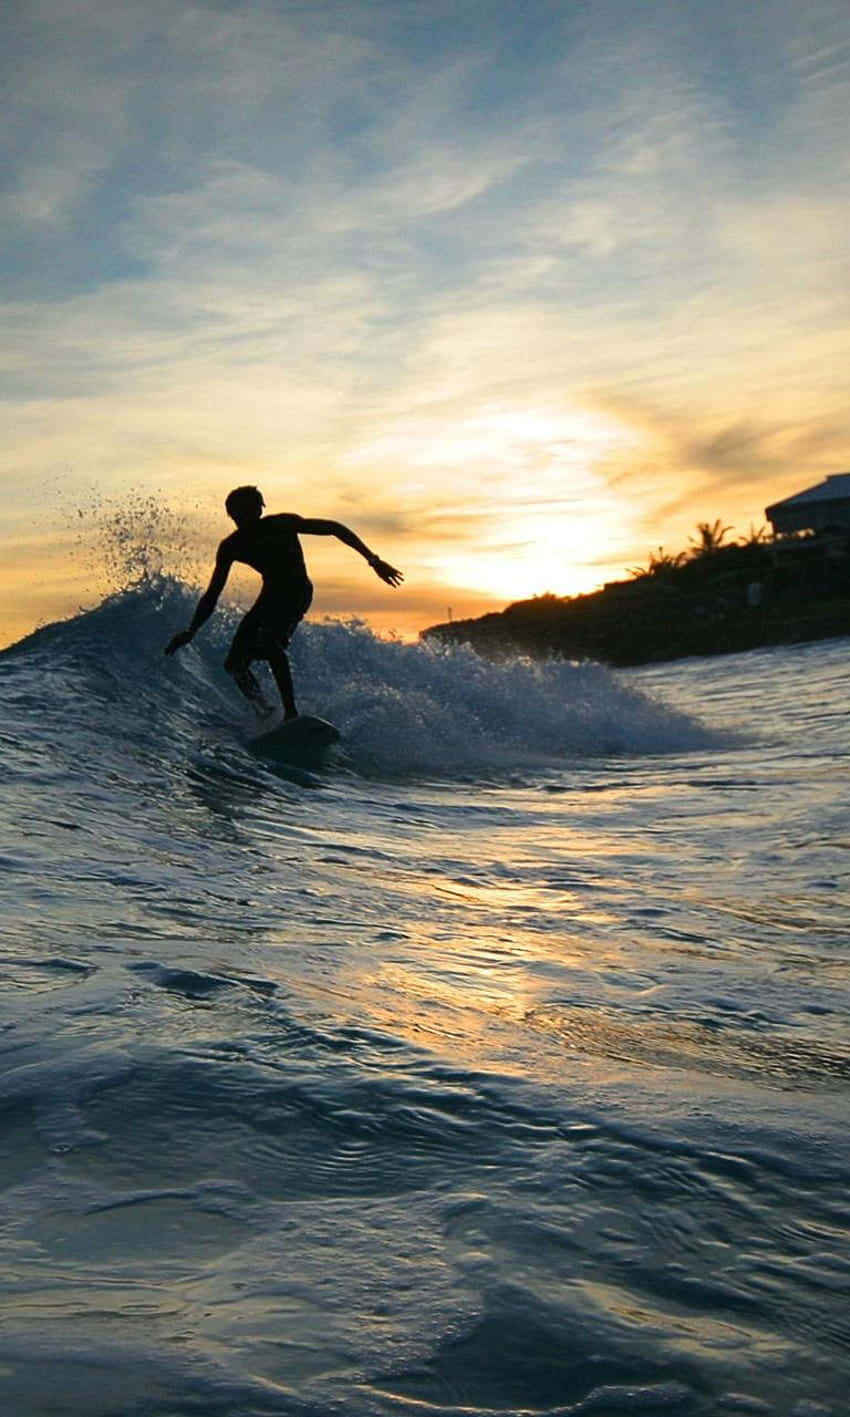 Ride the waves with this epic Surfing Iphone Wallpaper Wallpaper